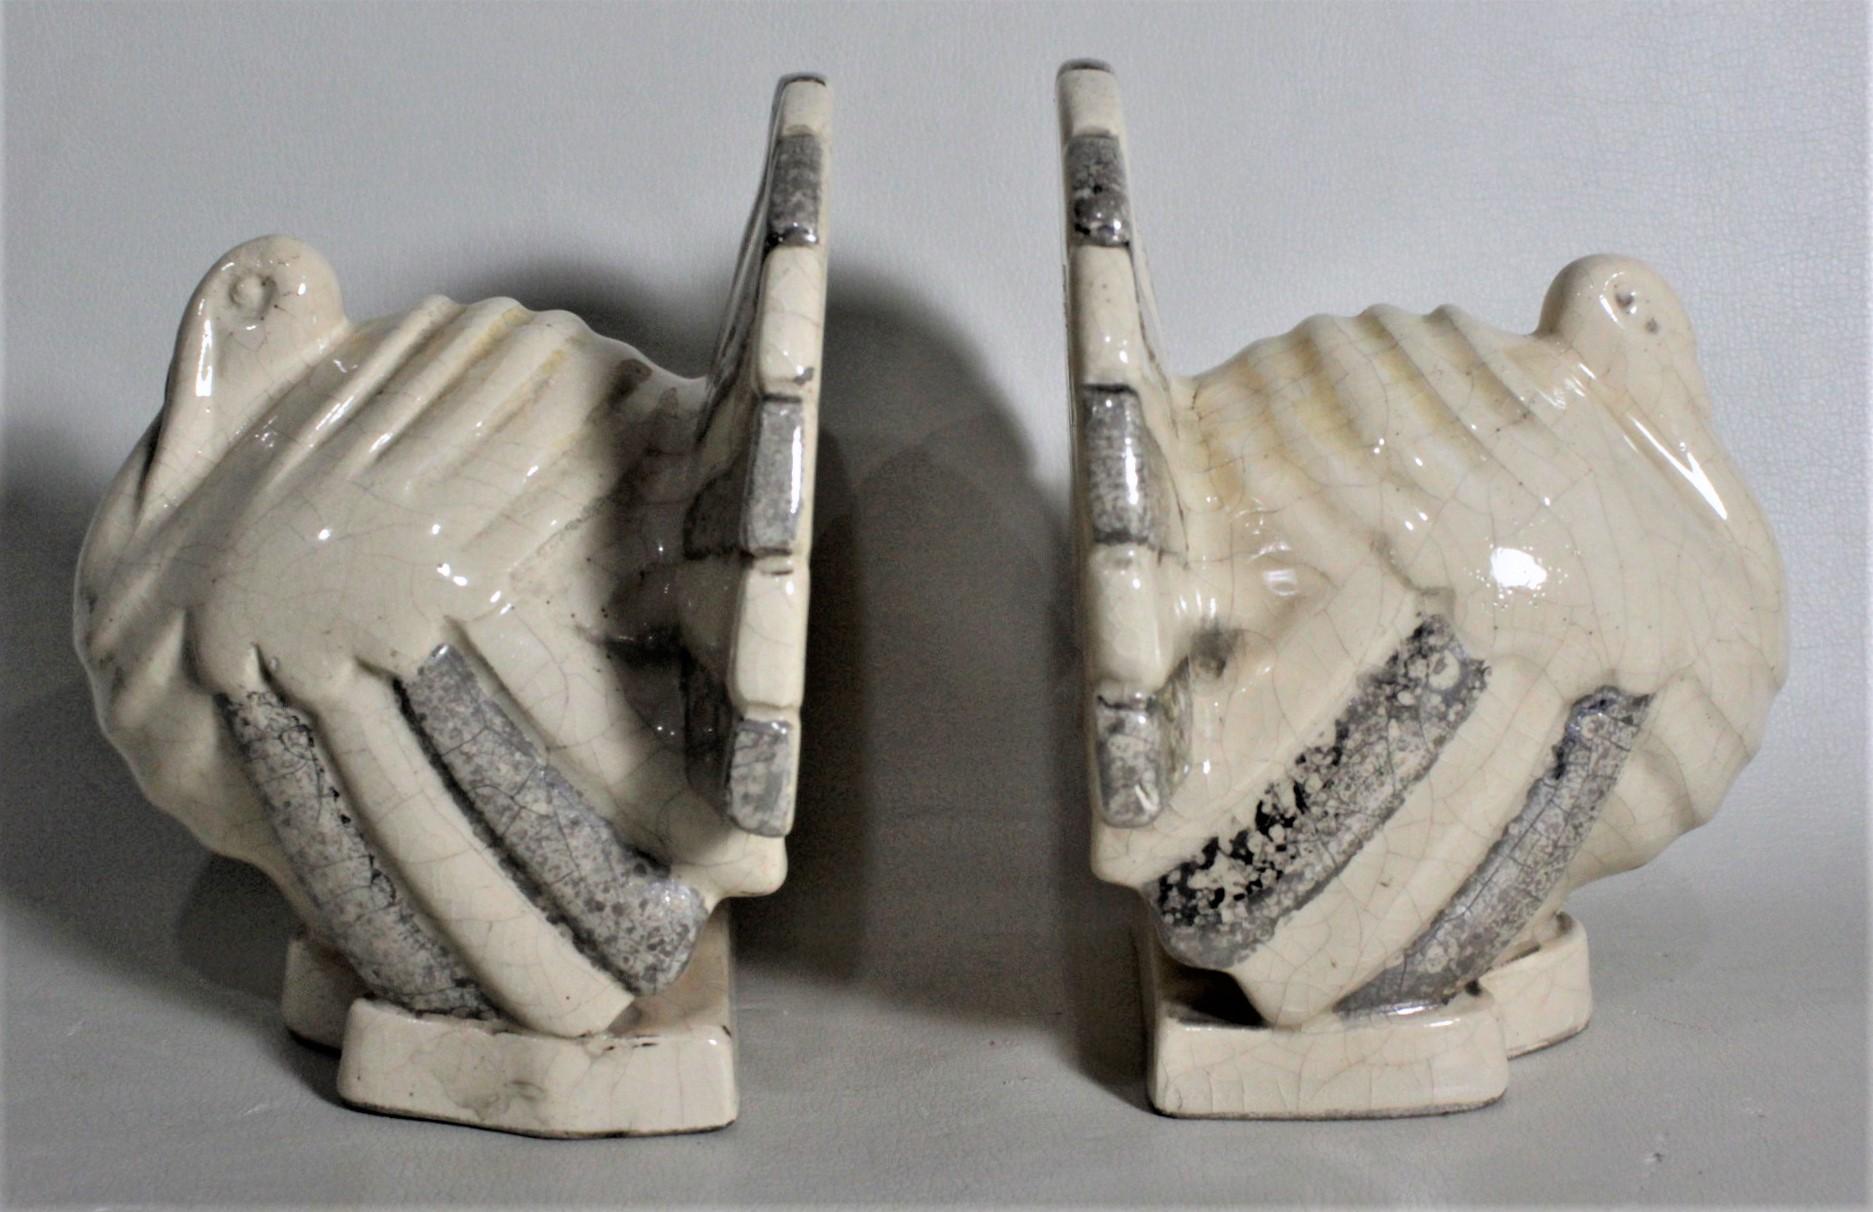 Glazed Art Deco Figural Ceramic Turkey Bookends in Taupe and Charcoal Grey Luster Glaze For Sale